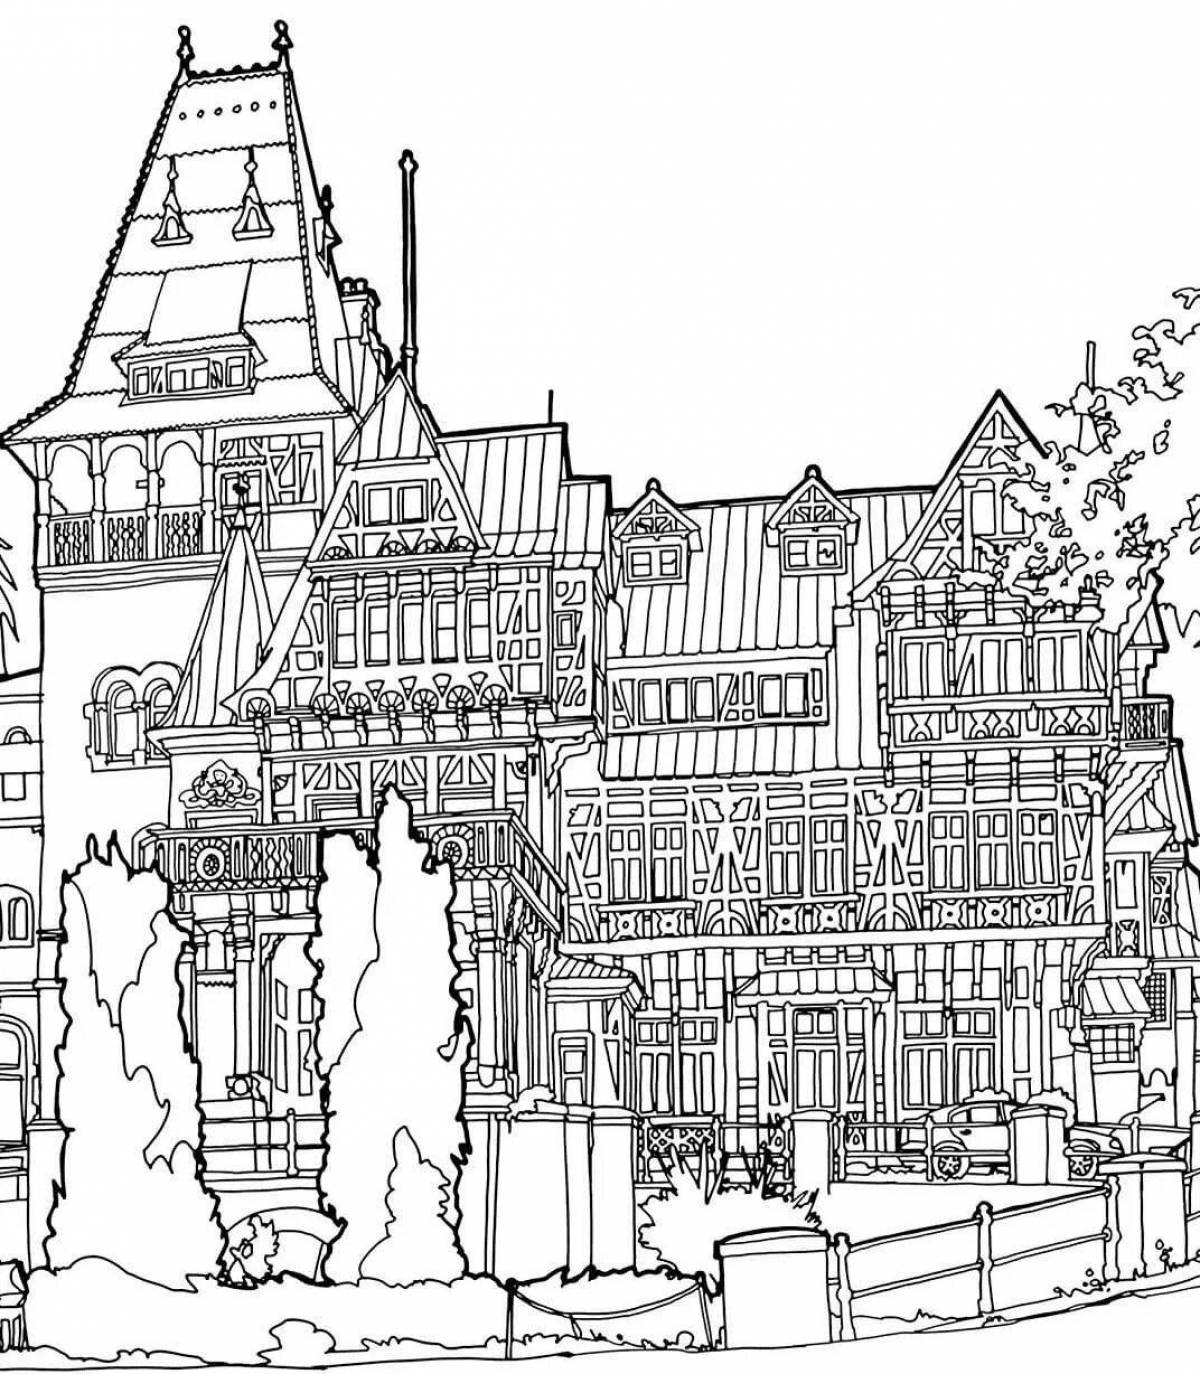 Architecture radiant coloring page